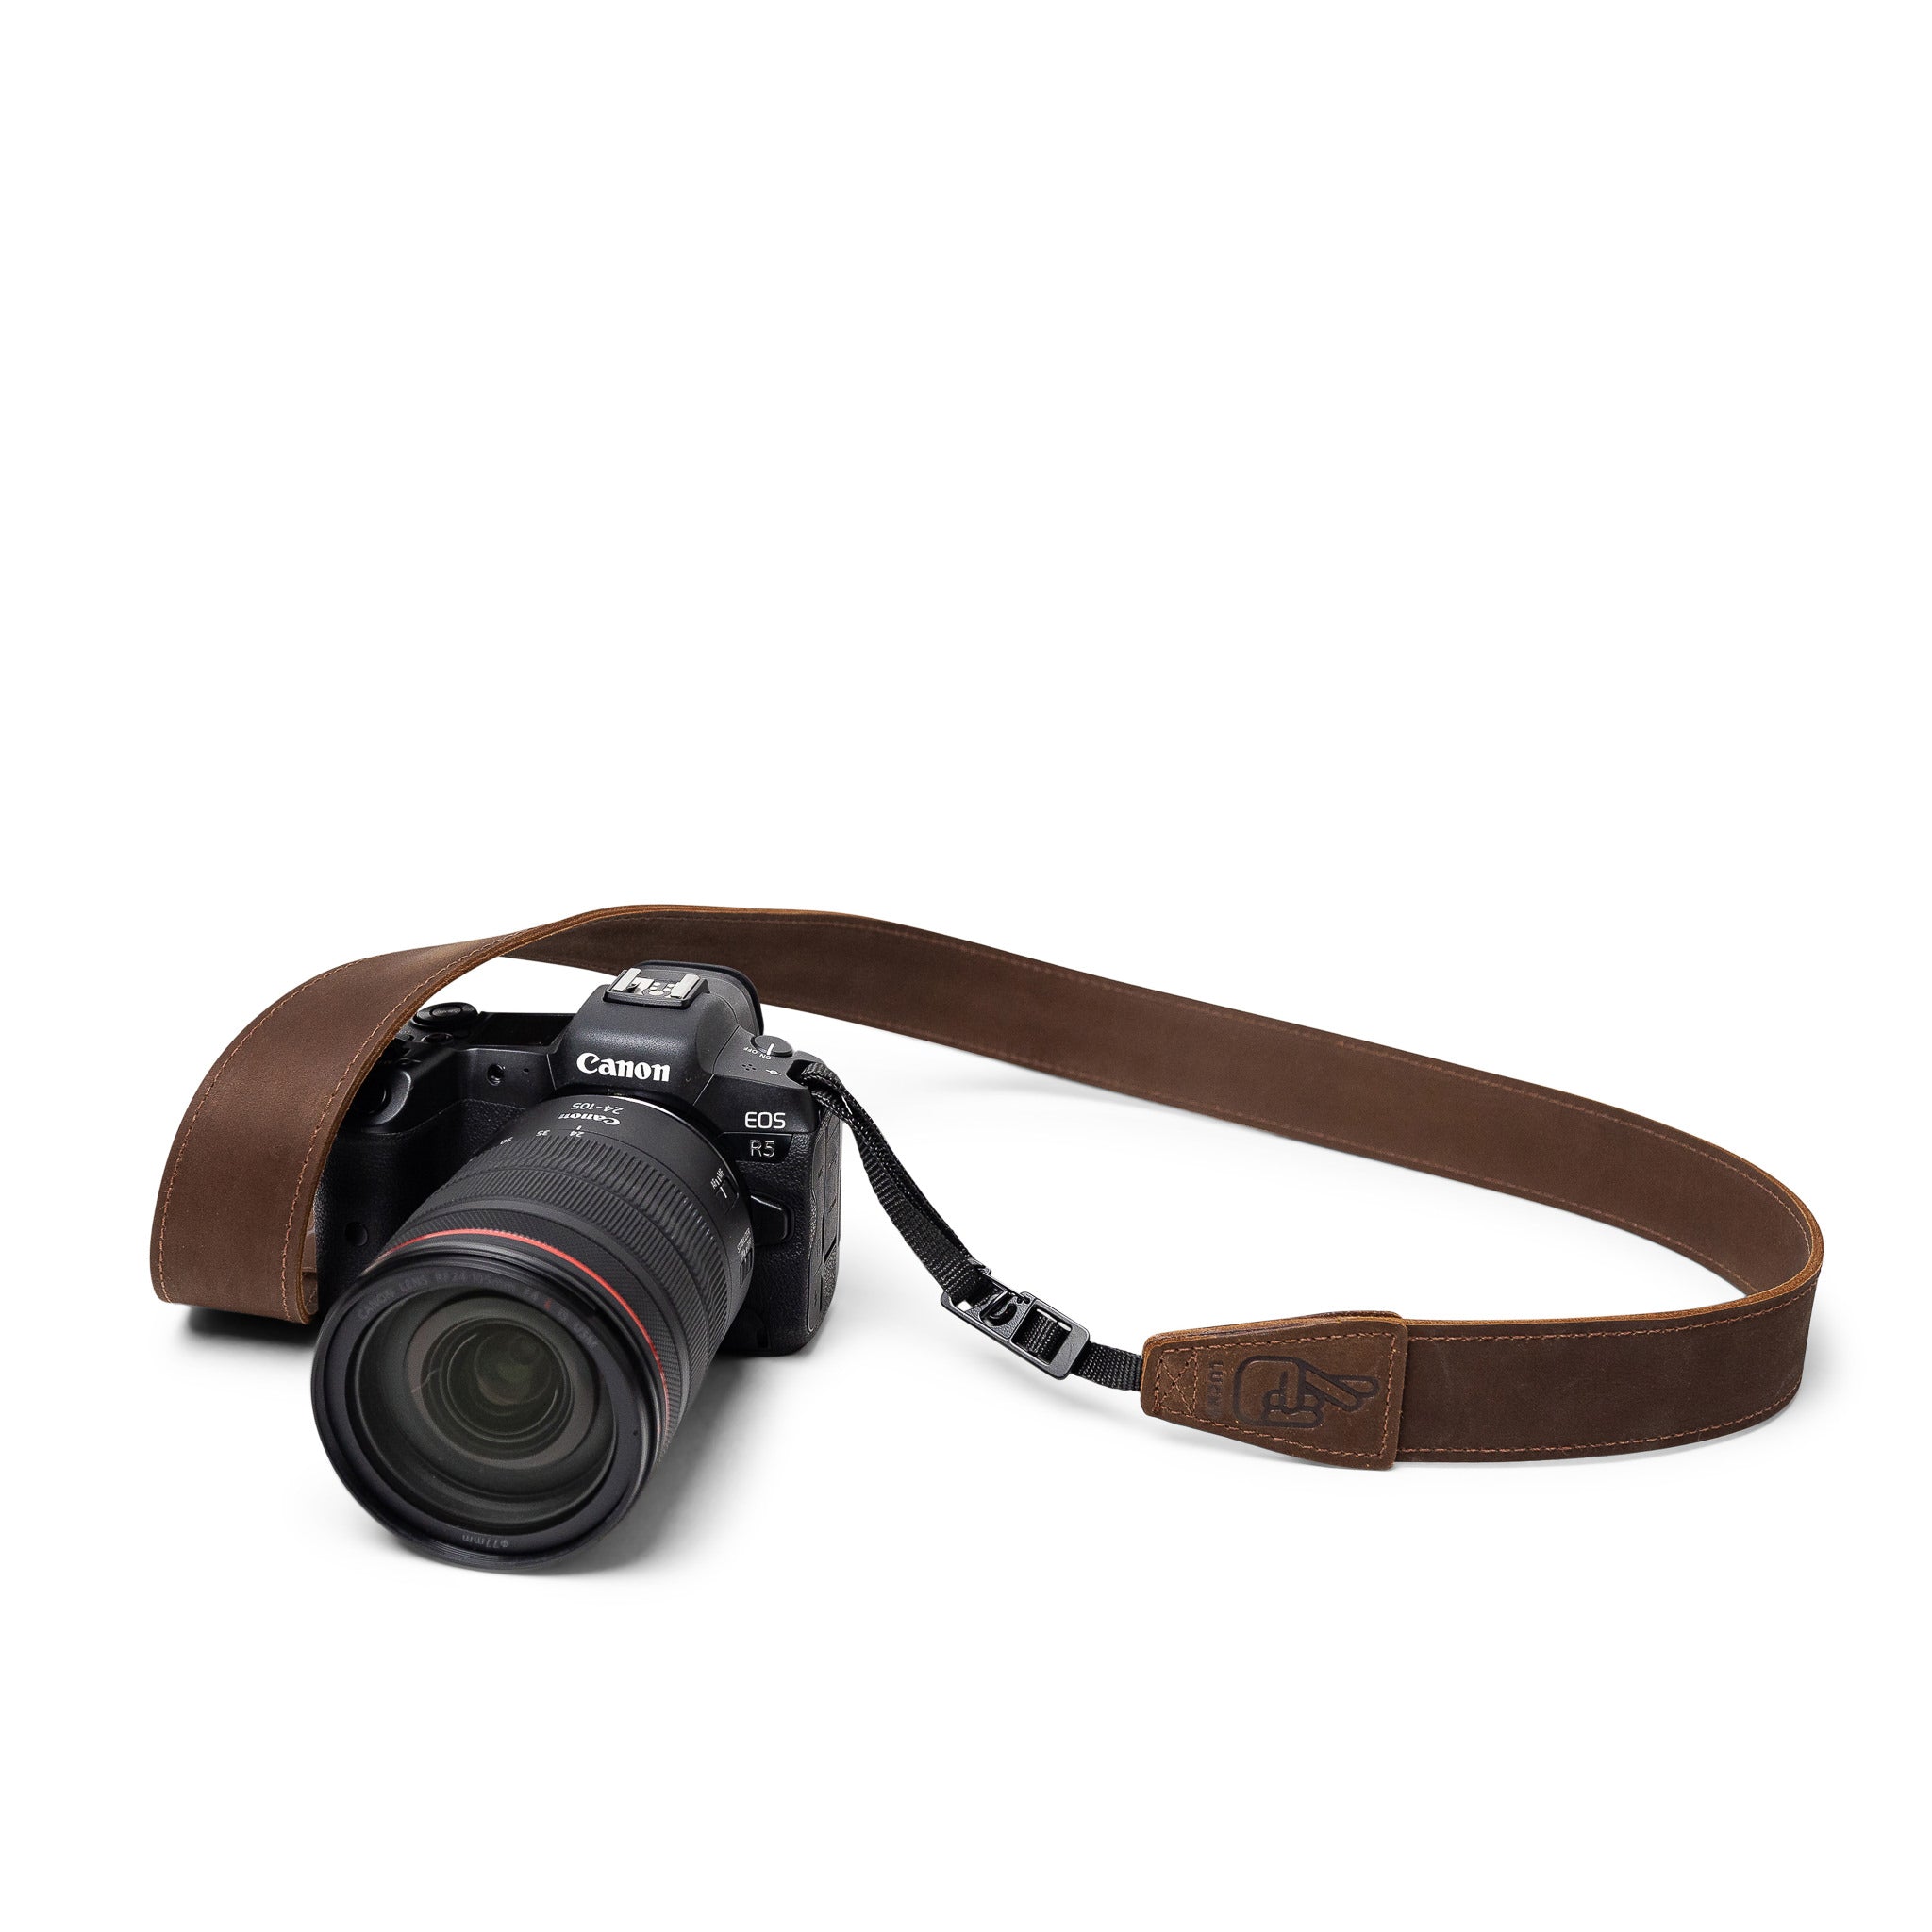 https://cdn.shopify.com/s/files/1/0291/0541/products/Lucky_Classic40_Leather_Camera_Strap_Dark_Brown_Mocha-4.jpg?v=1629174269